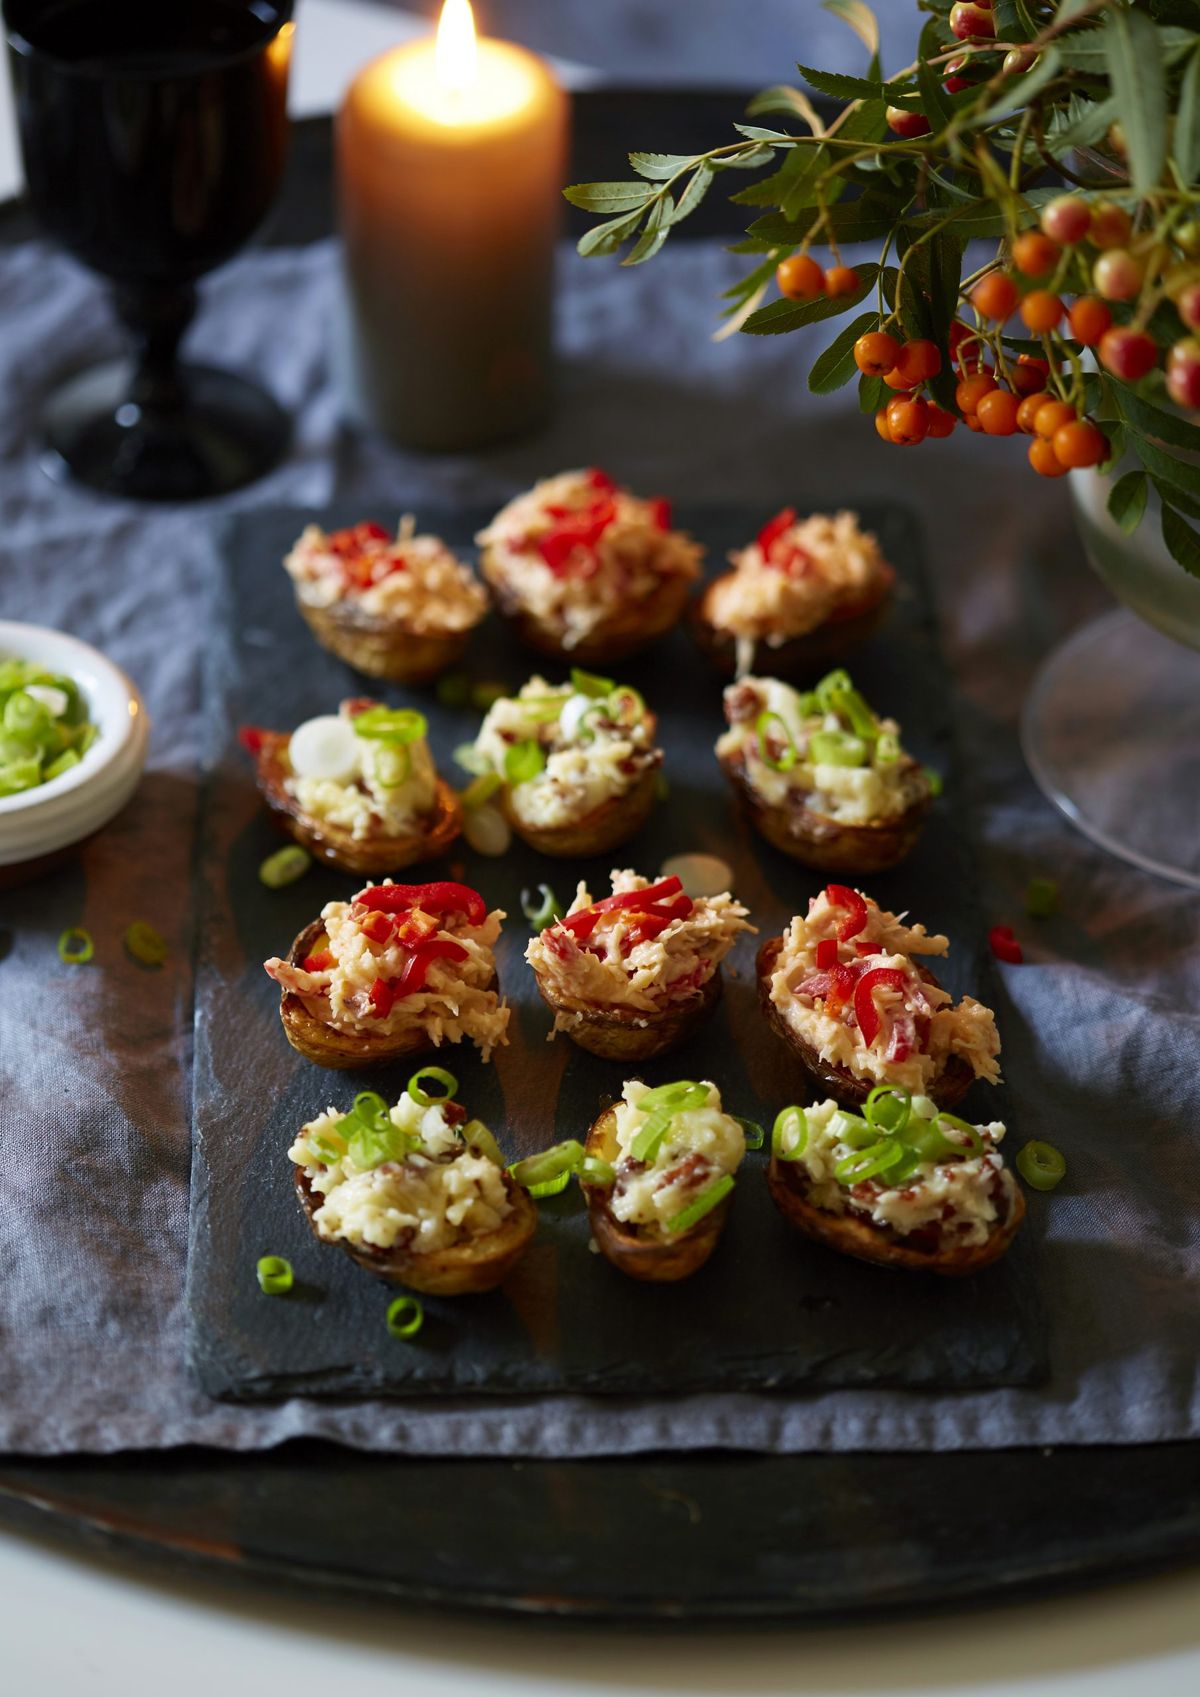 Make these moreish and crowdpleasing loaded potato skins for a tasty party treat